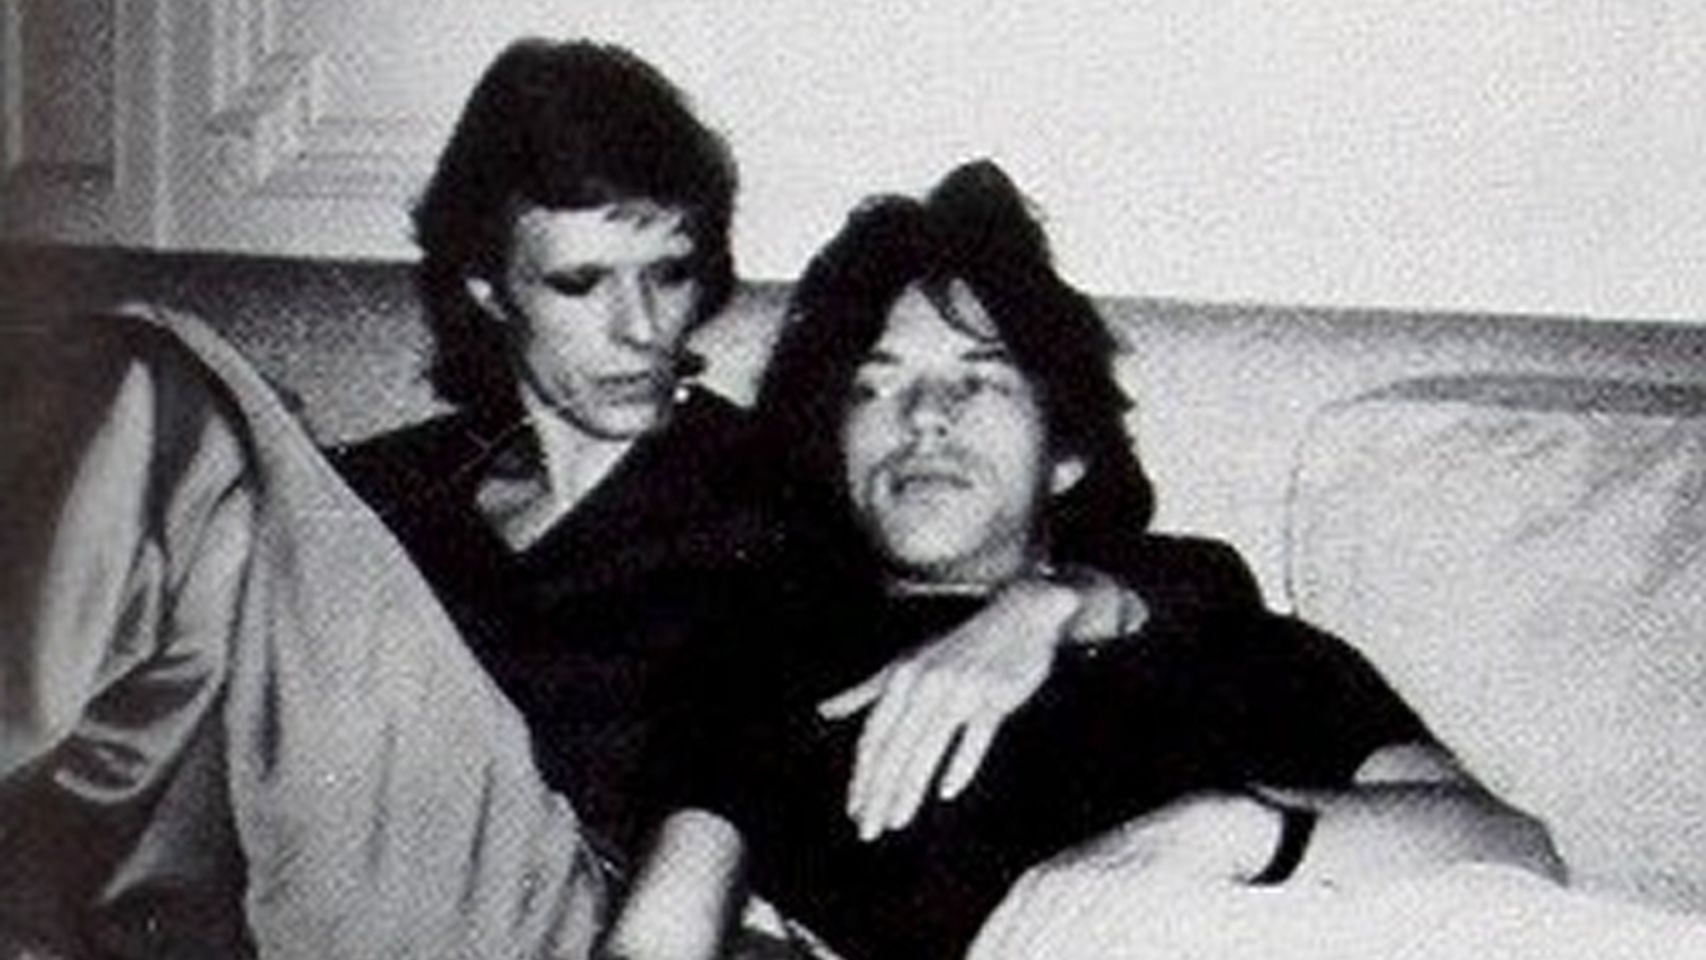 DAVID BOWIE AND MICK JAGGER — Steemit